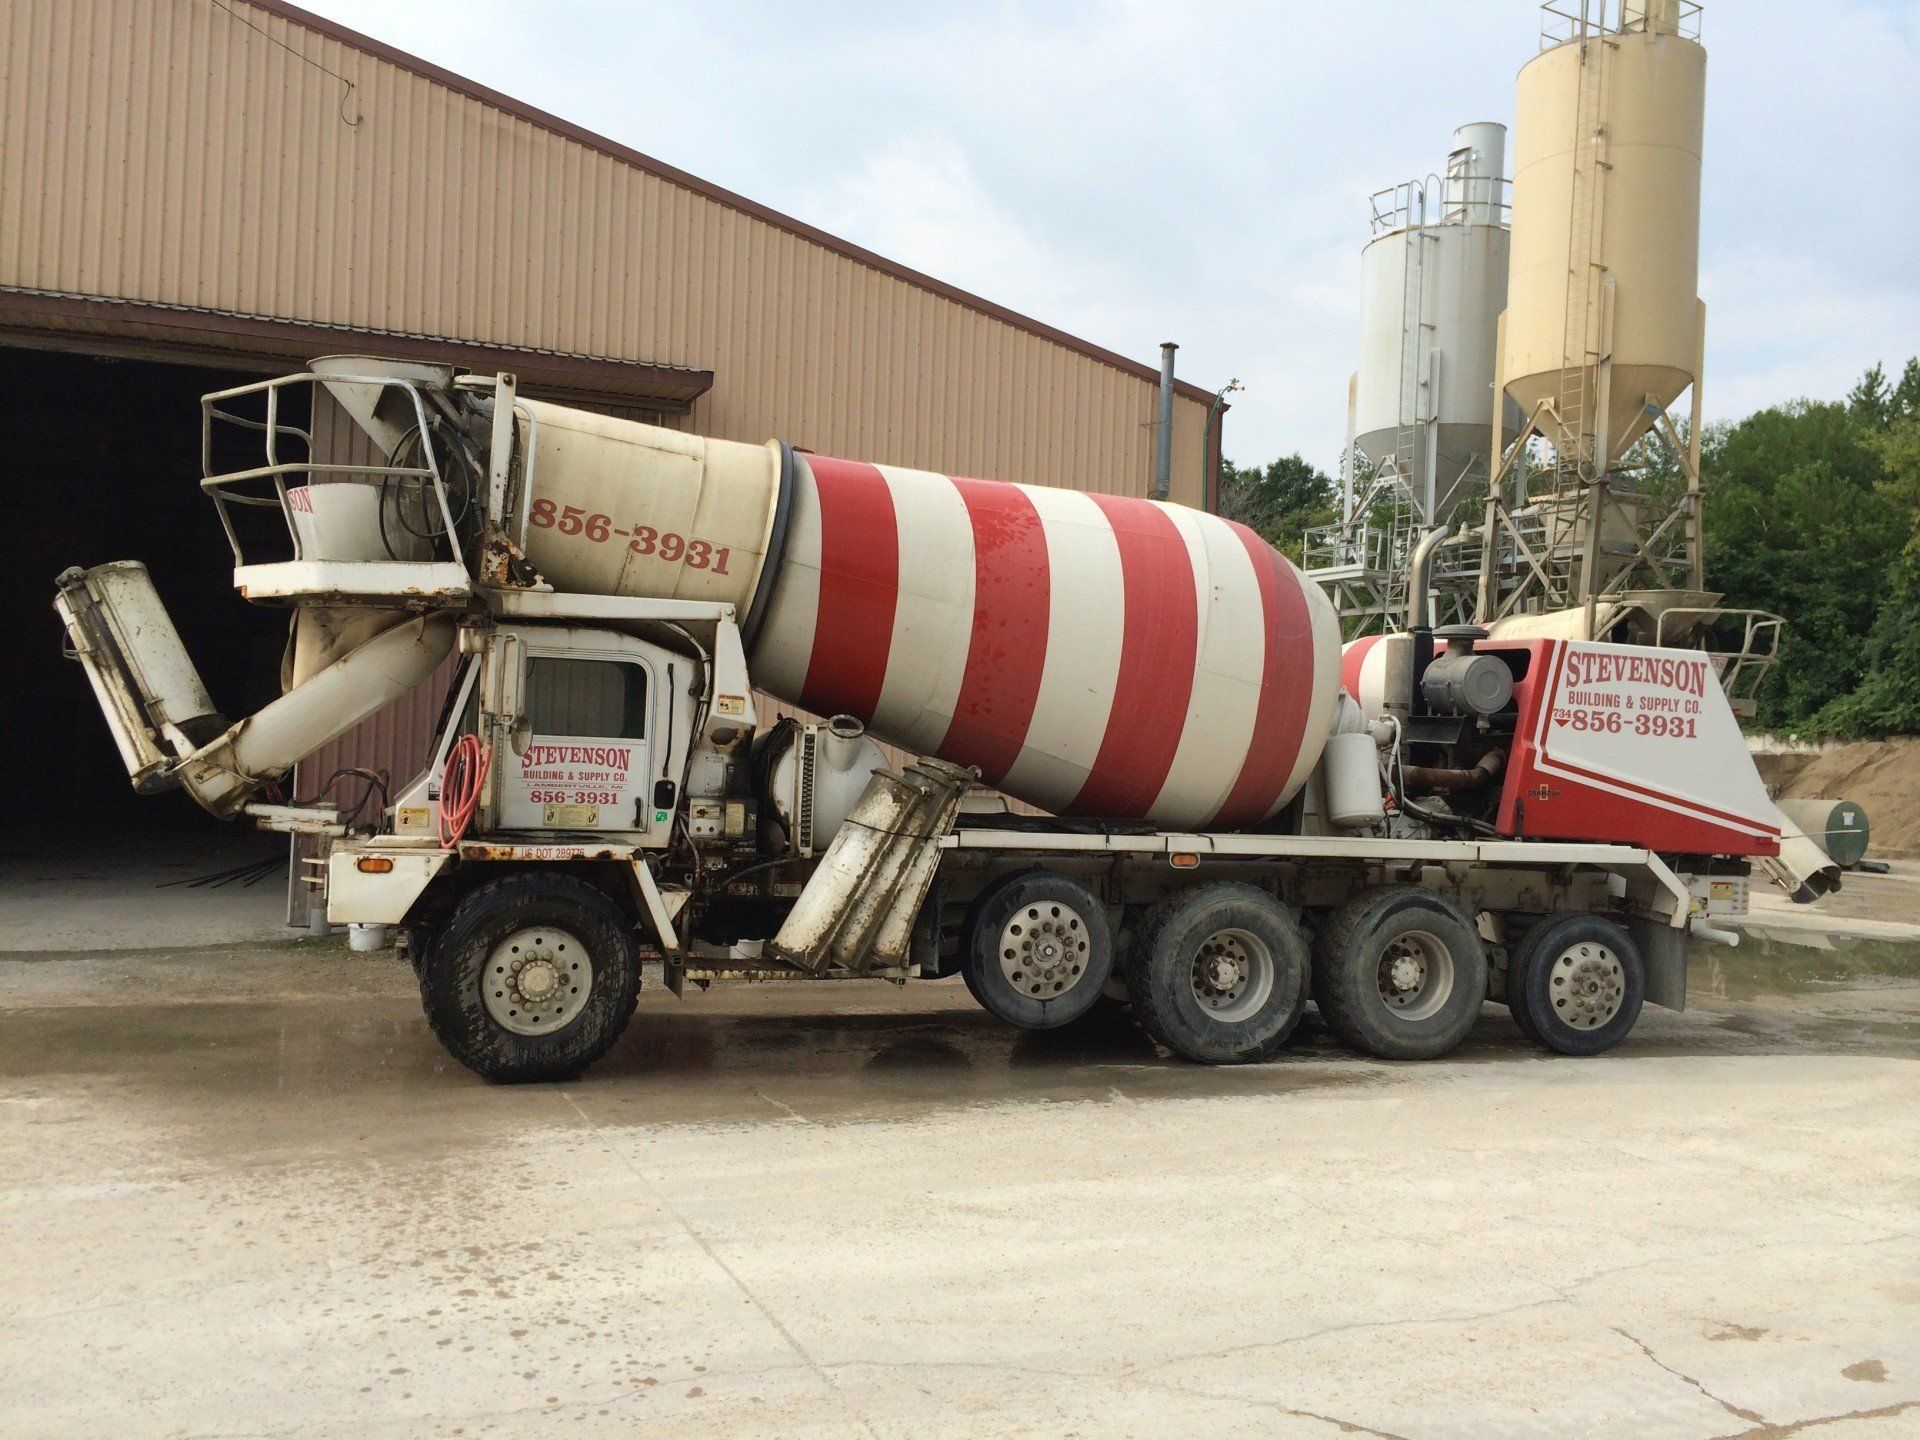 Why Should I Go For Ready Mix Concrete, Concrete Delivery